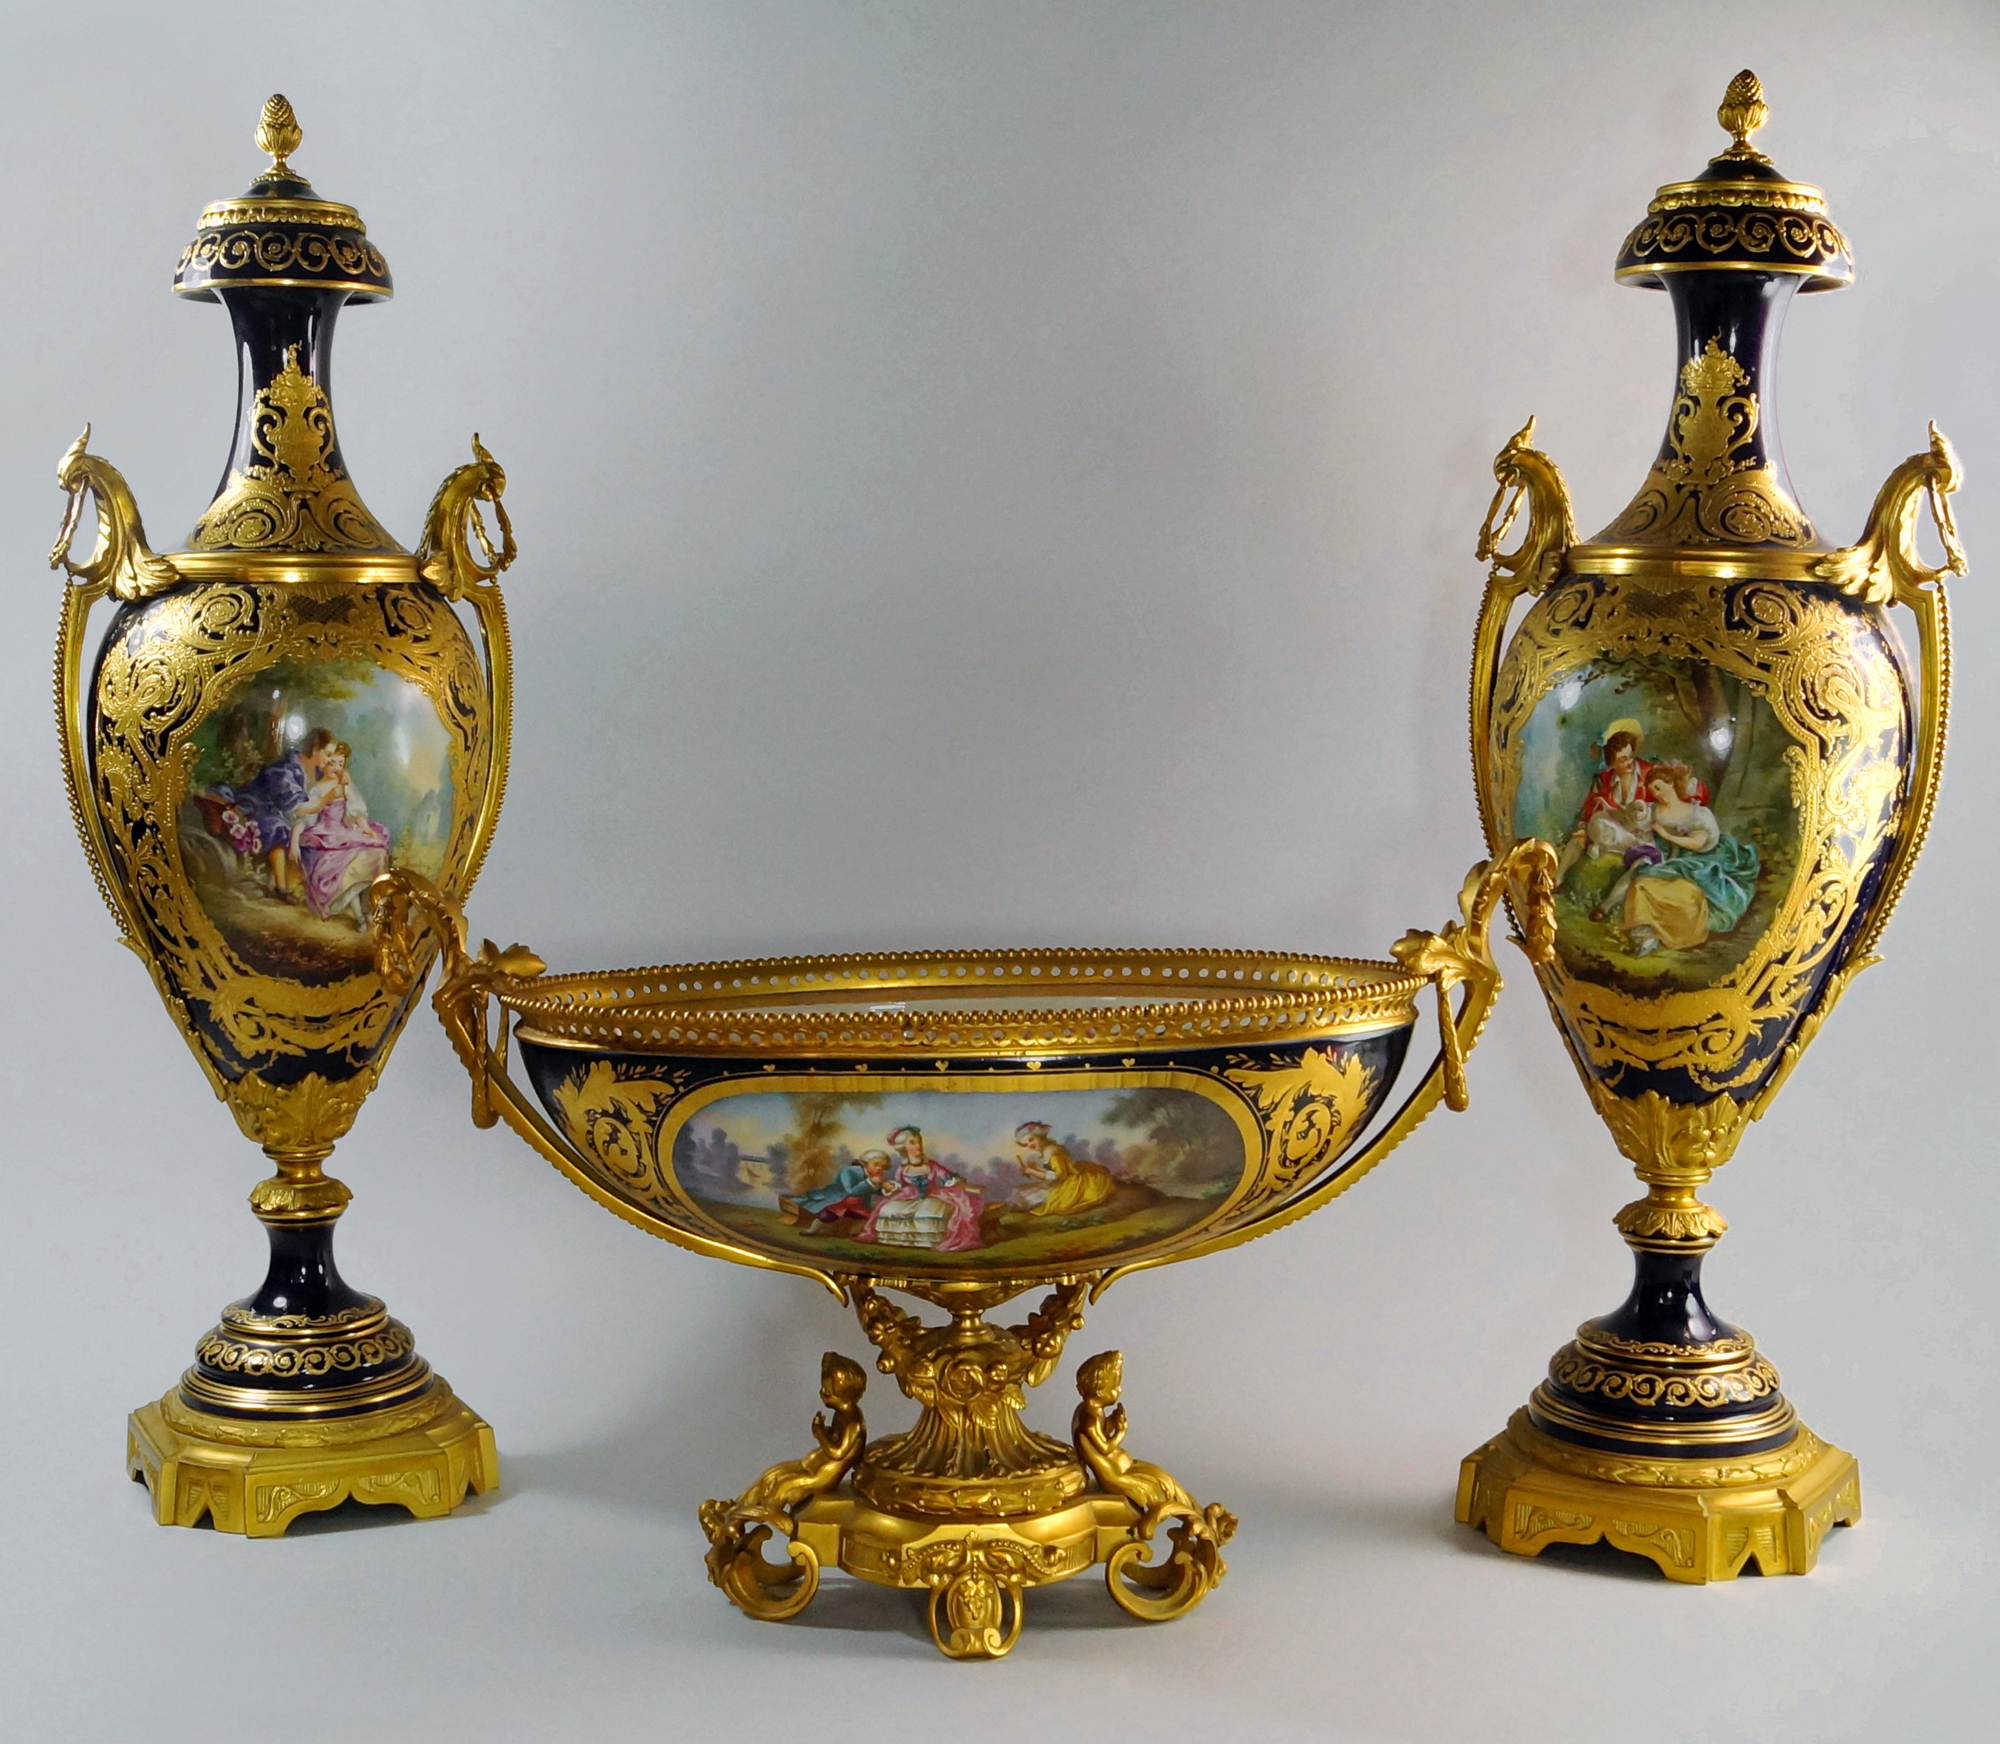 Pair of Sevres ormolu mounted porcelain vases, 19th century, with lids, signed Lancry, 27.6in high, together with a matching oval comport. Estimate: £5,000-£8,000. Roseberys image